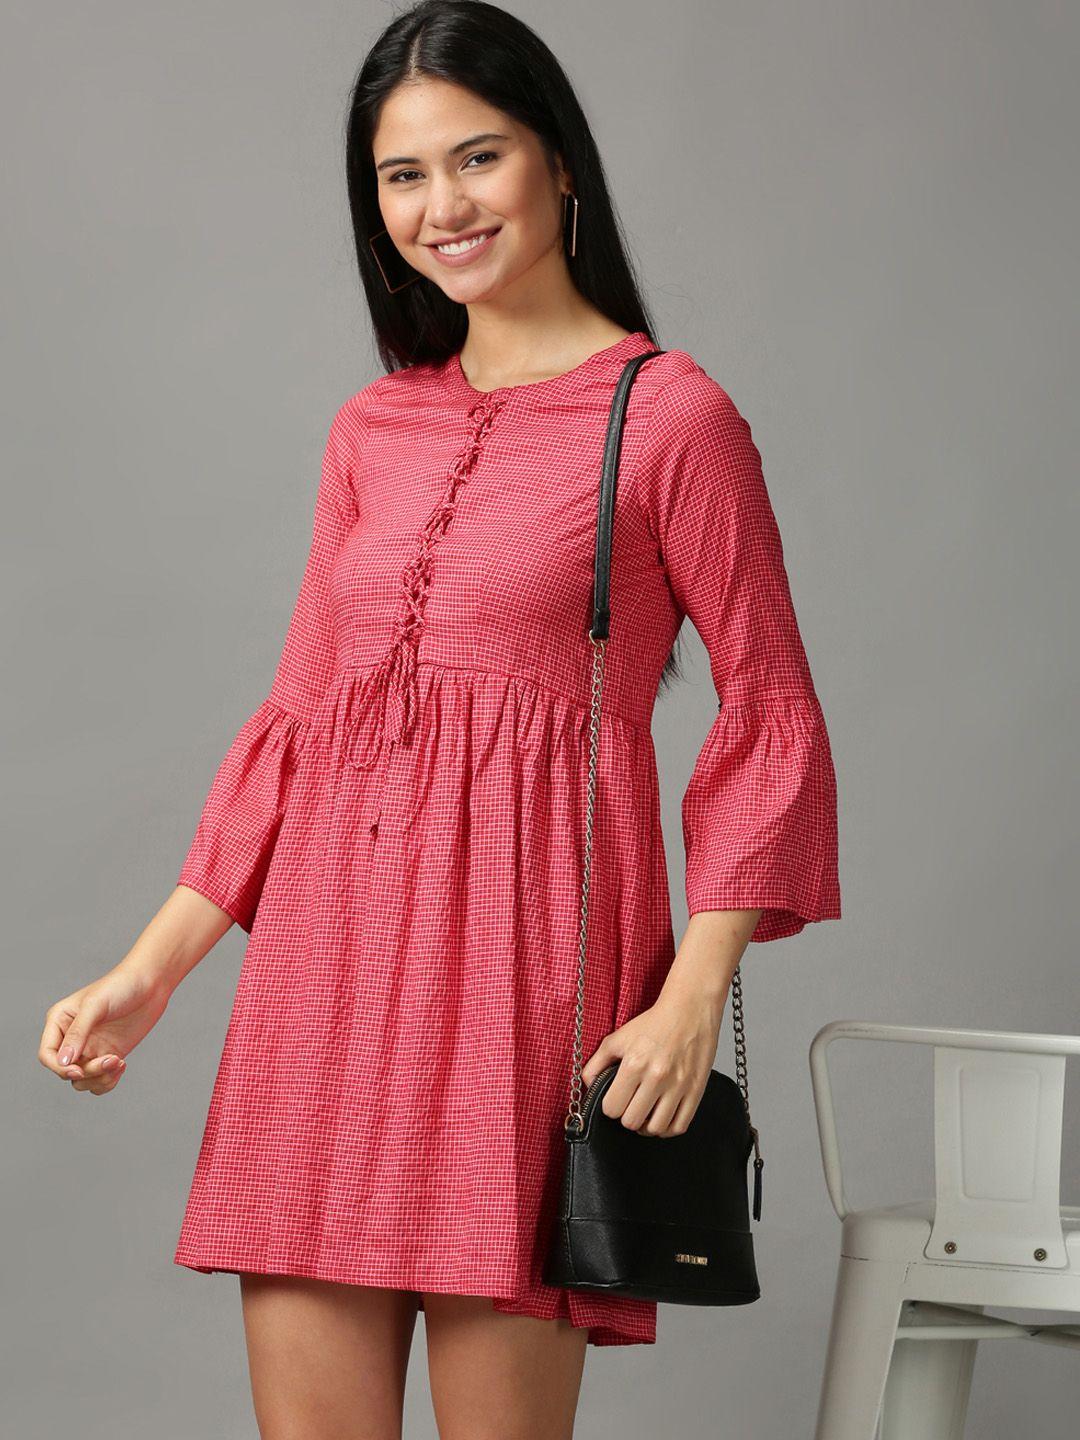 showoff-red-ethnic-cotton-dress